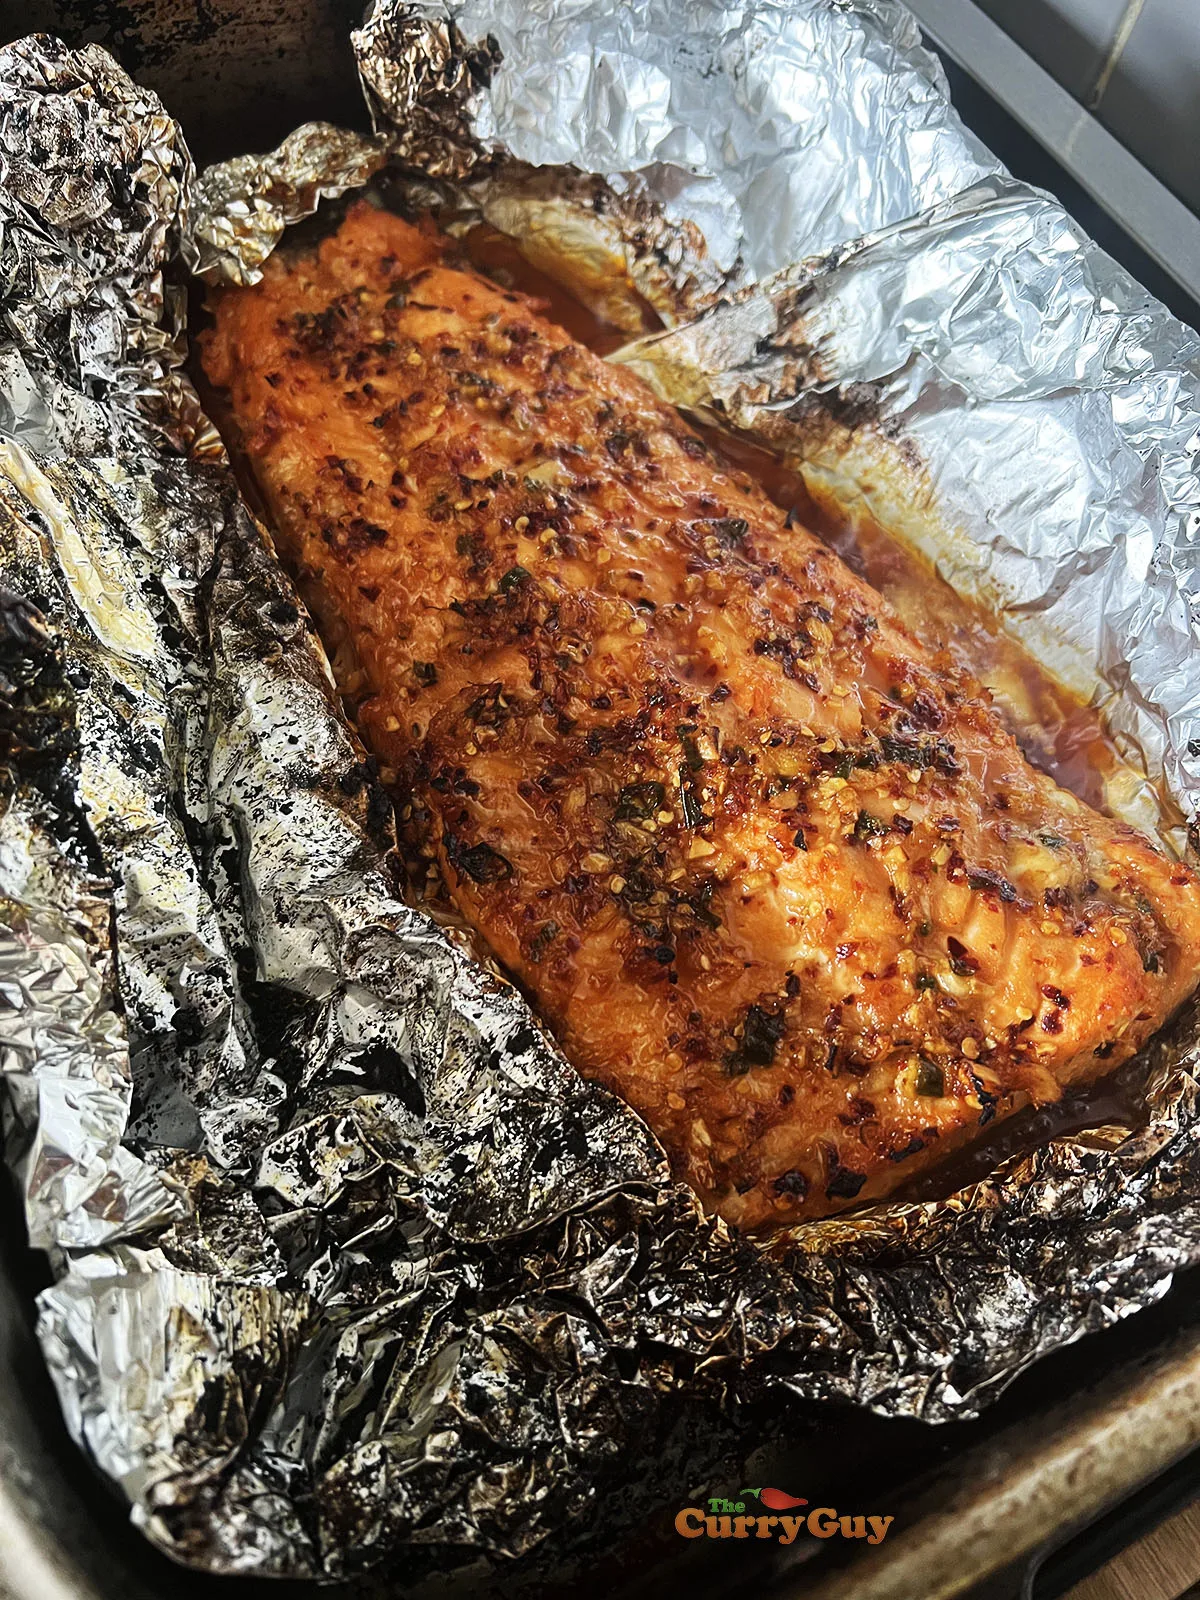 Grilled and baked salmon